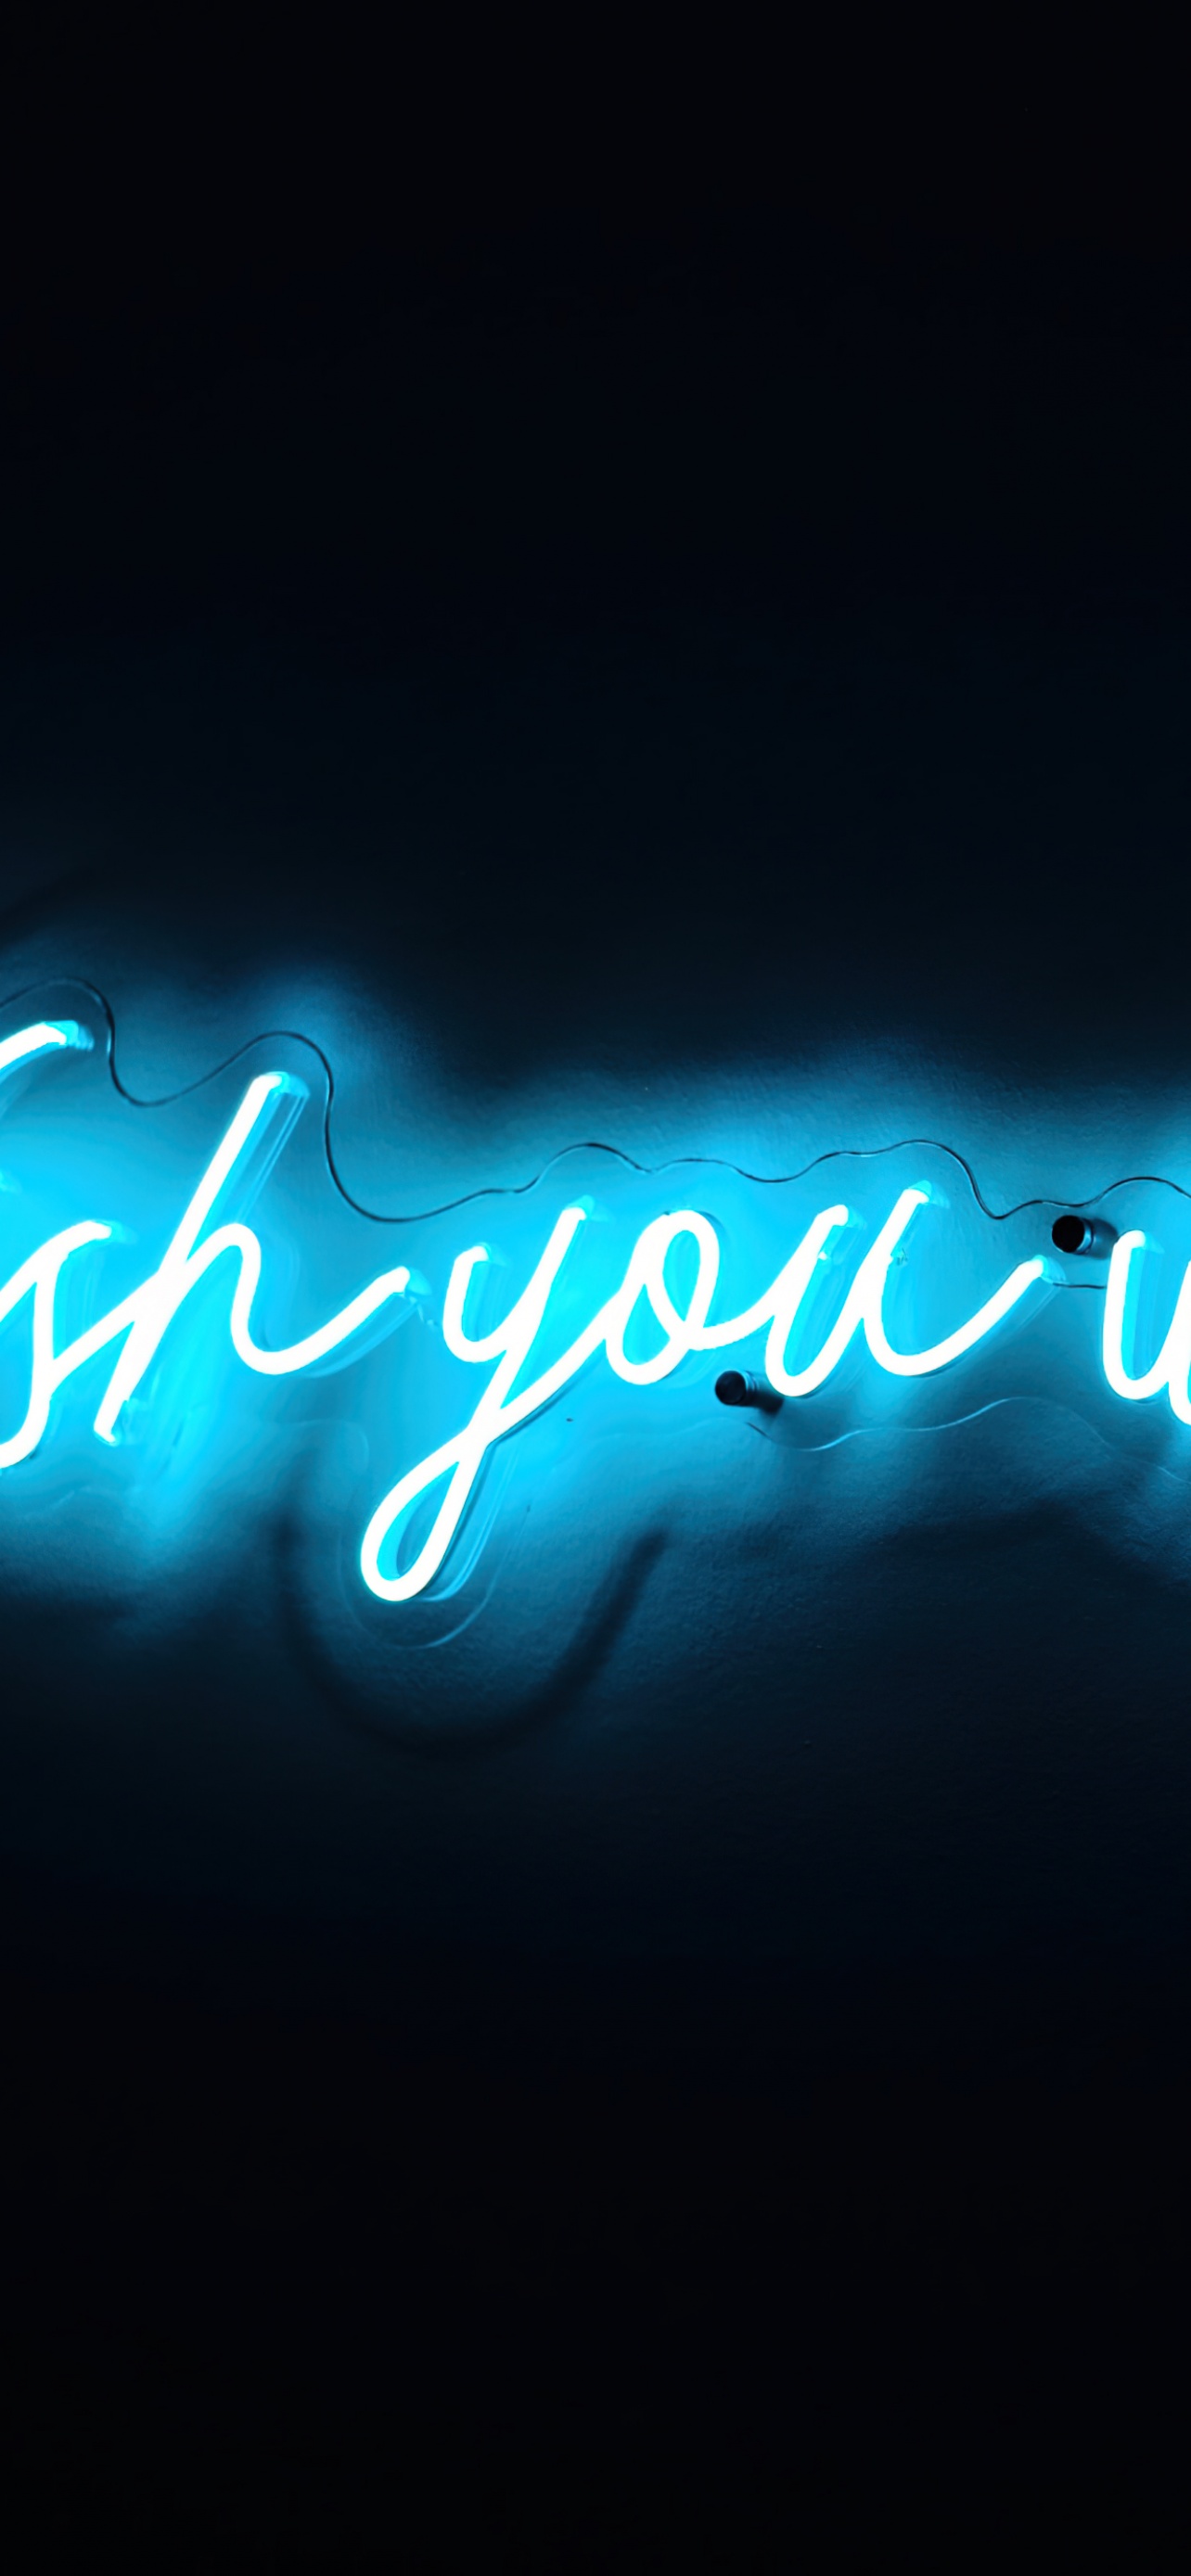 Wish you were here Wallpaper 4K, Love quotes, Quotes, #6579